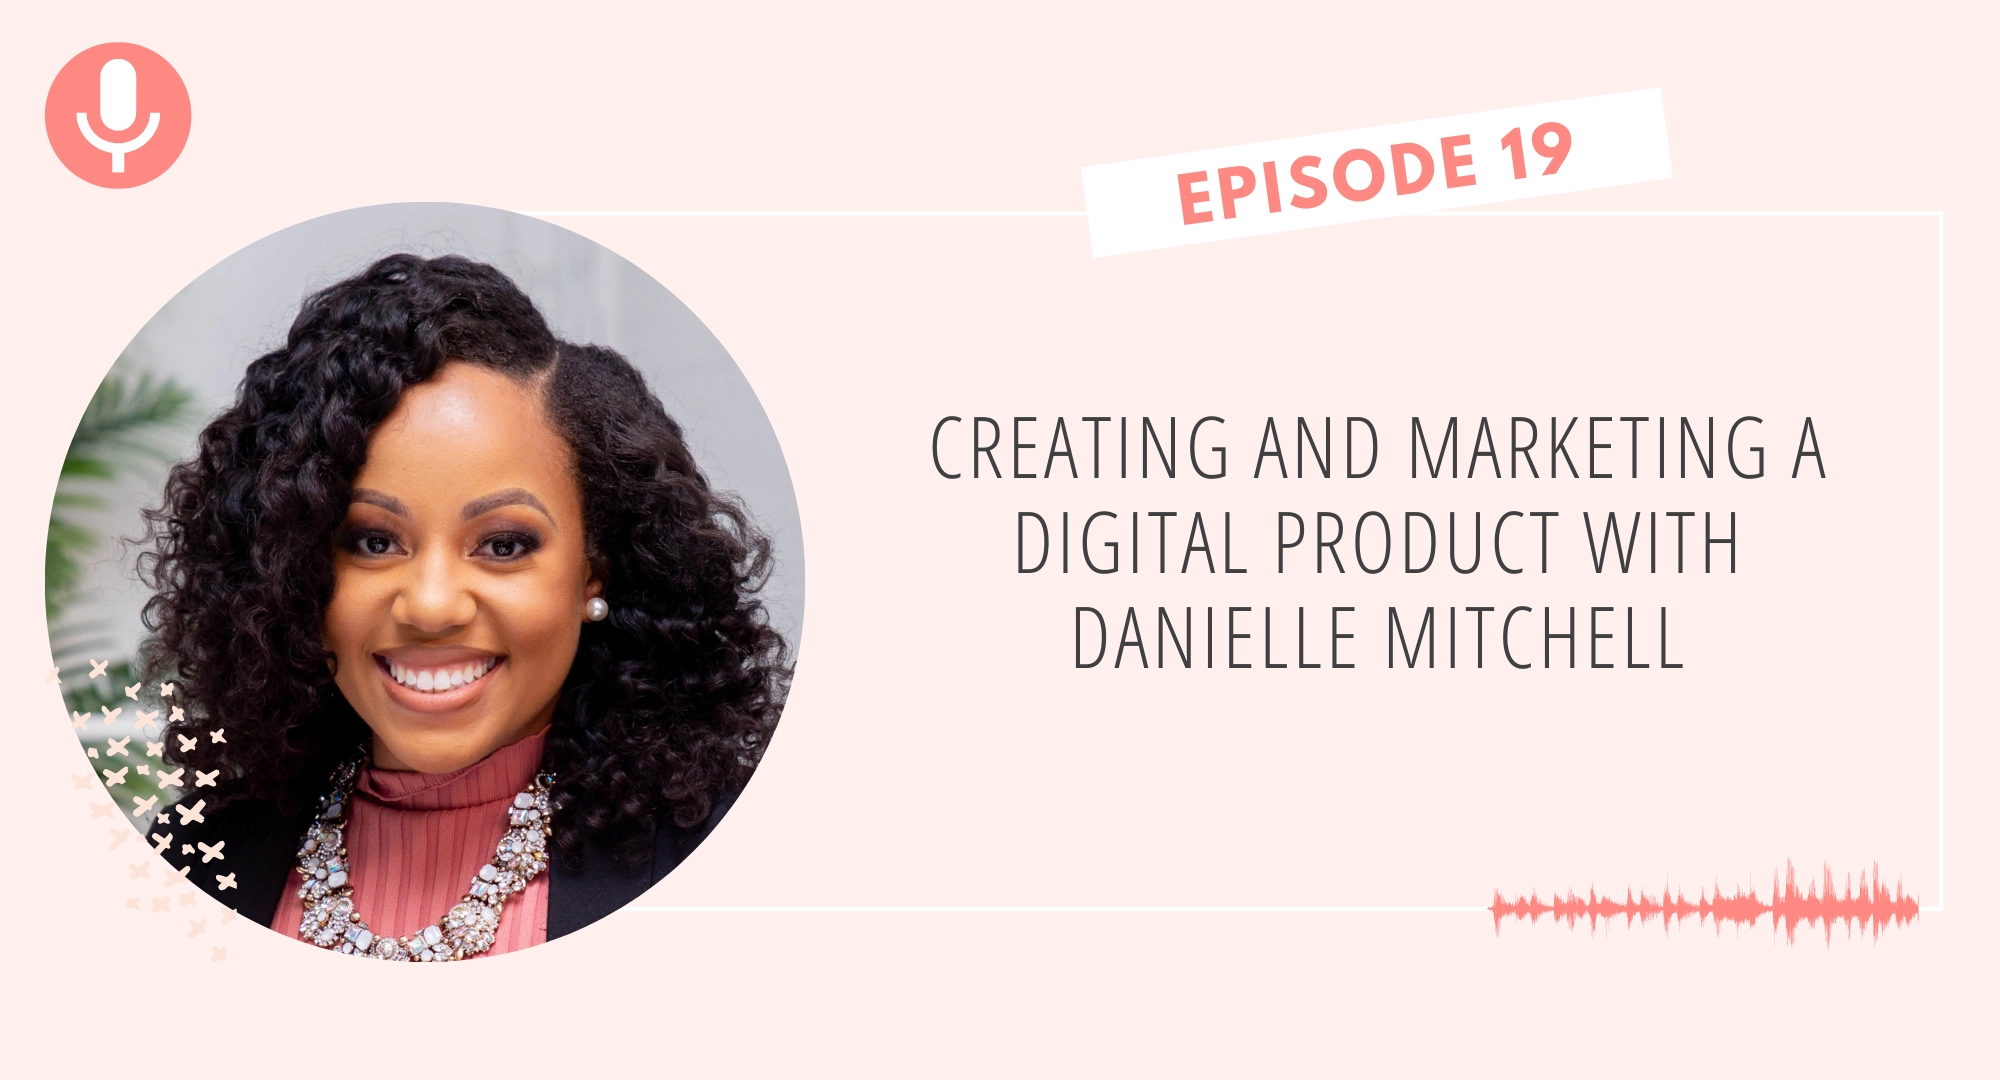 Creating and Marketing a Digital Product with Danielle Mitchell